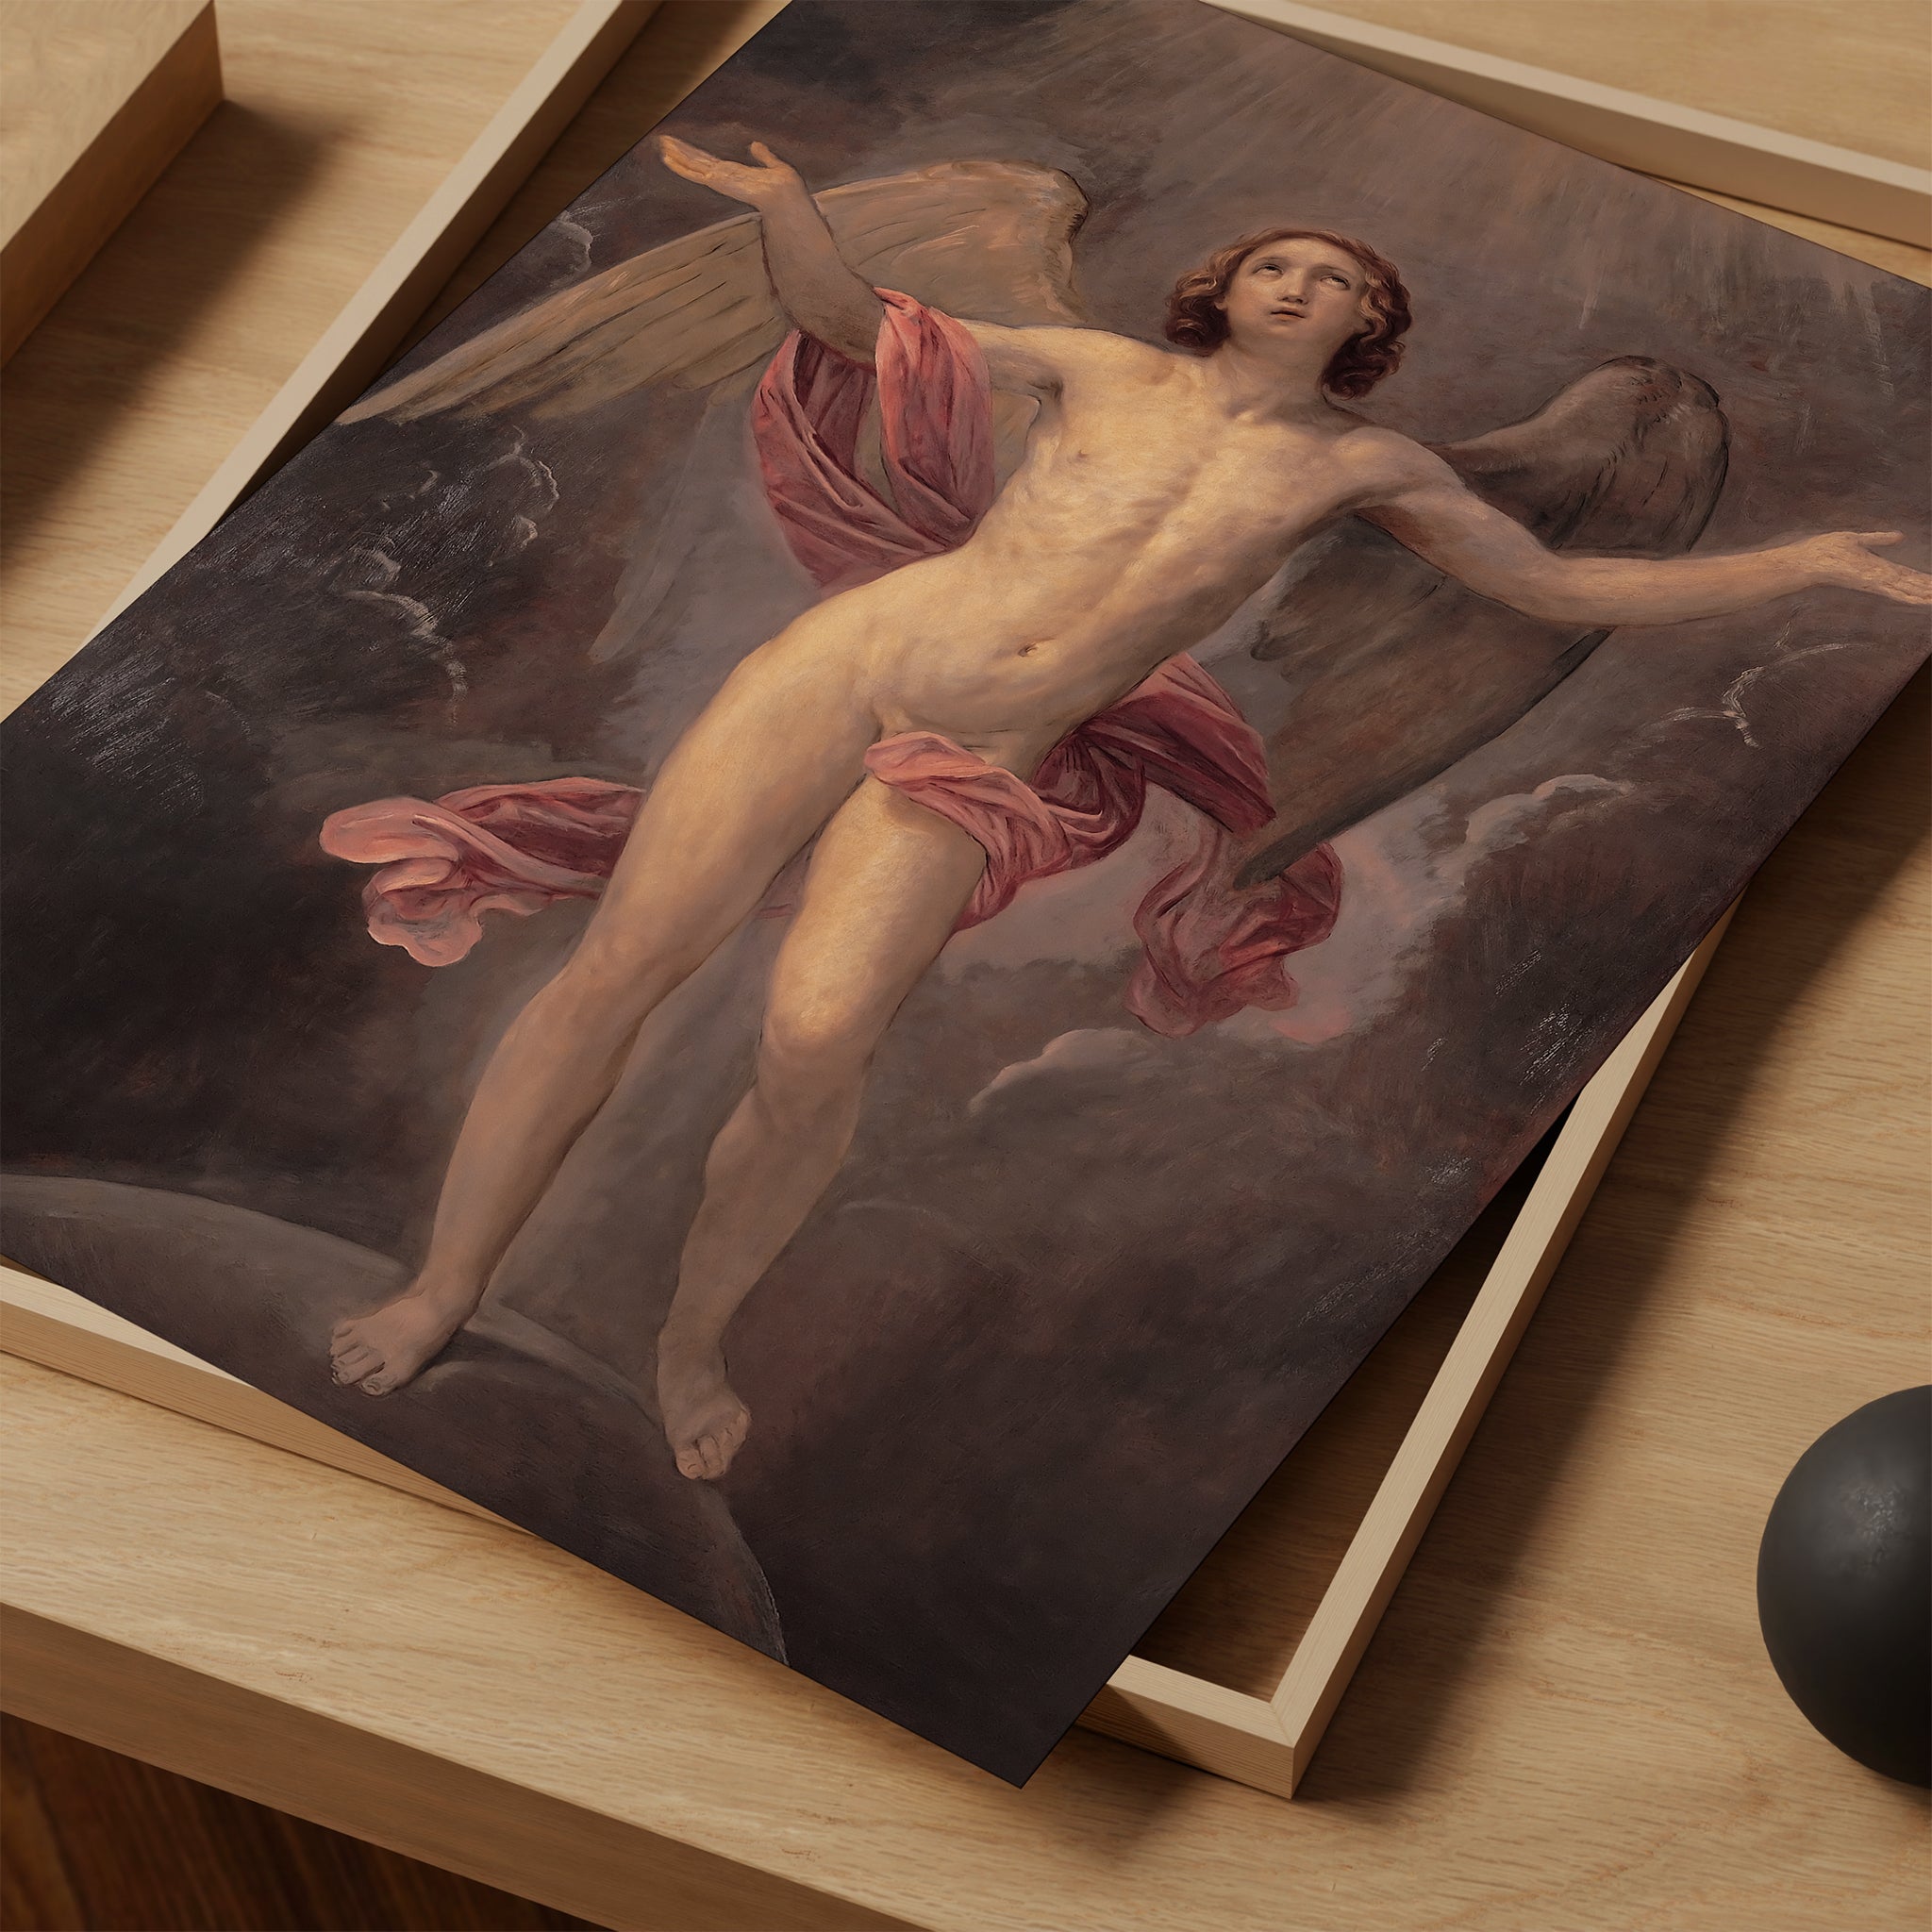 Be inspired by our classic art print Blessed Soul by Guido Reni. This artwork was printed using giclée on archival acid-free paper and is presented as a print close-up that captures its timeless beauty in every detail.